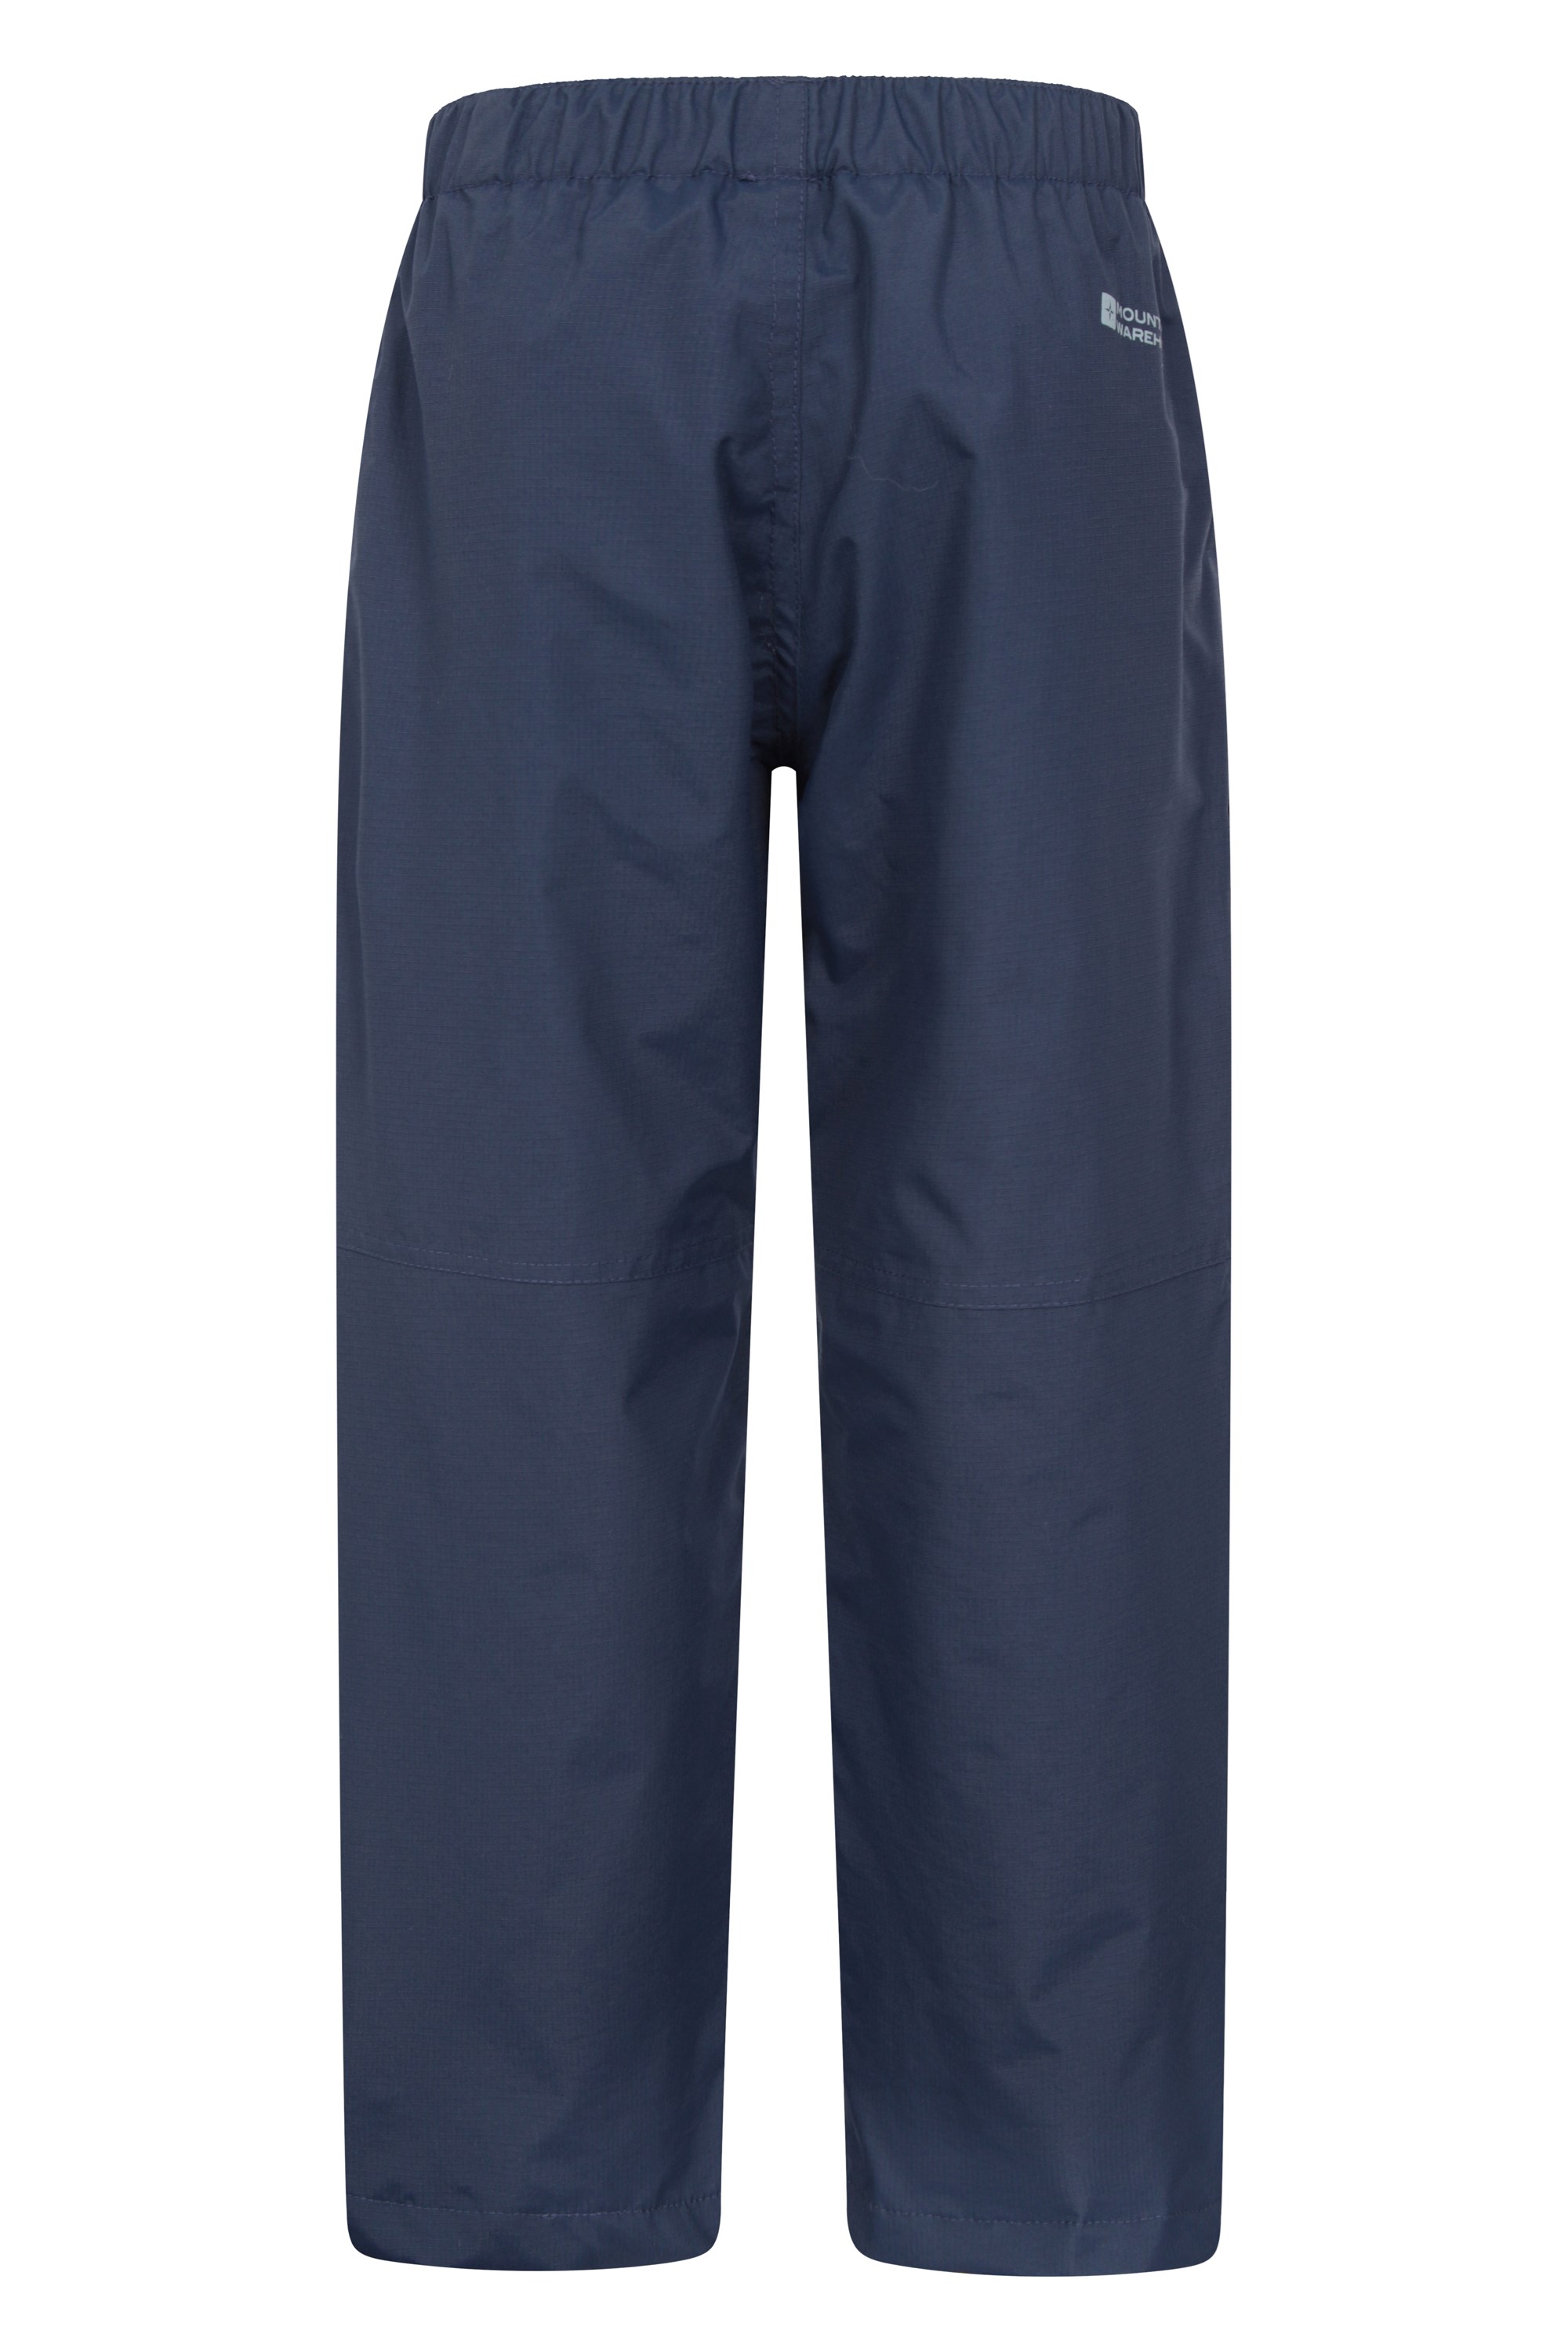 Waterproof Work Trousers and Over Trousers – workweargurus.com